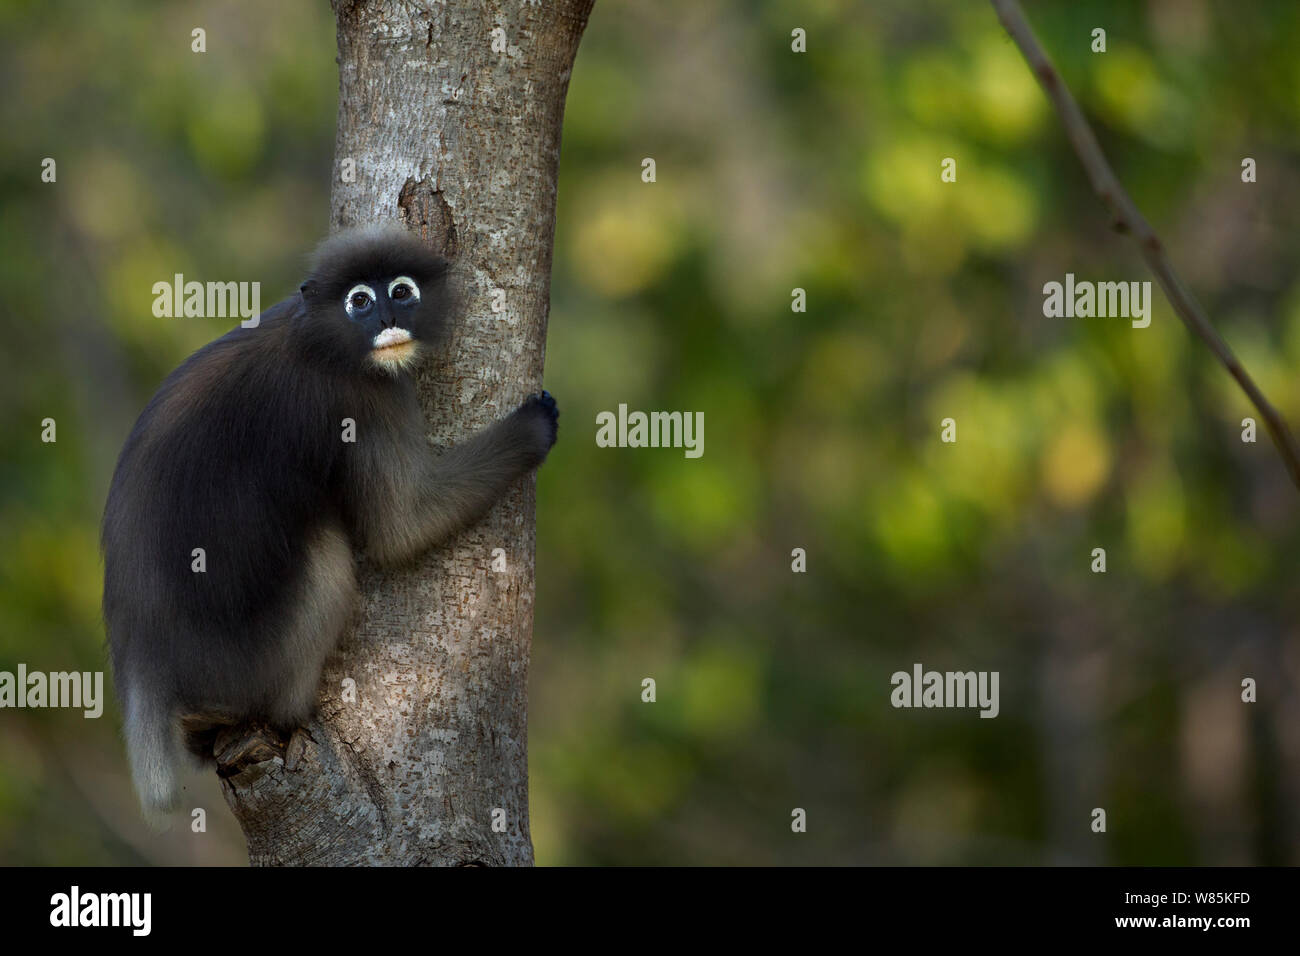 Dusky leaf monkey (Trachypithecus obscurus) clinging to a tree   . Khao Sam Roi Yot National Park, Thailand. March 2015. Stock Photo